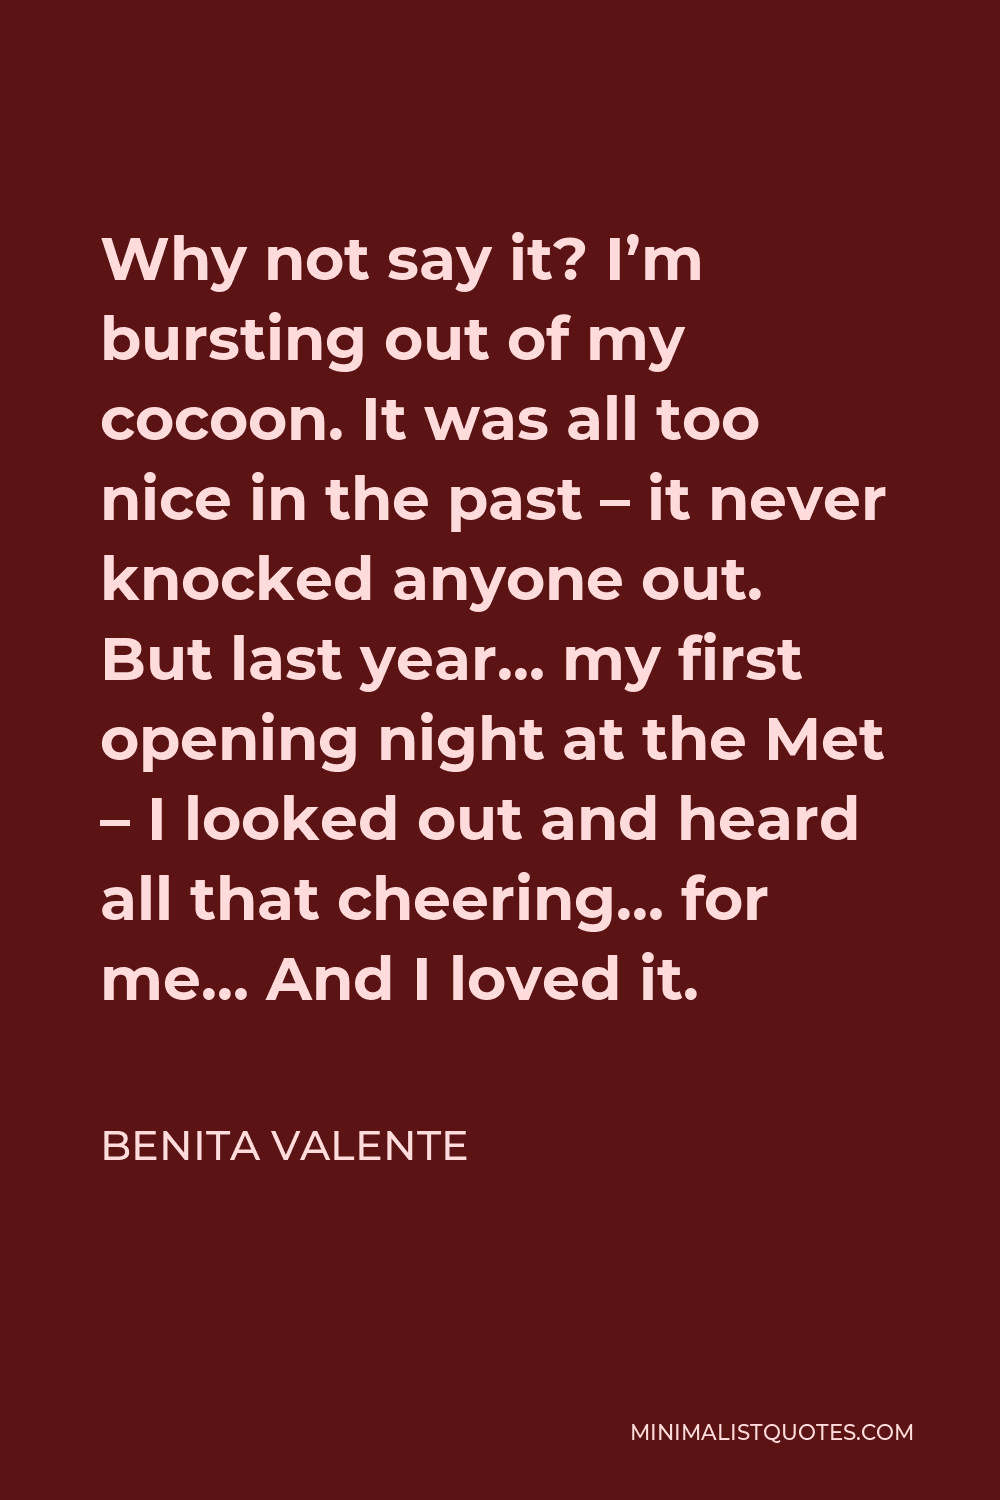 Benita Valente Quote - Why not say it? I’m bursting out of my cocoon. It was all too nice in the past – it never knocked anyone out. But last year… my first opening night at the Met – I looked out and heard all that cheering… for me… And I loved it.